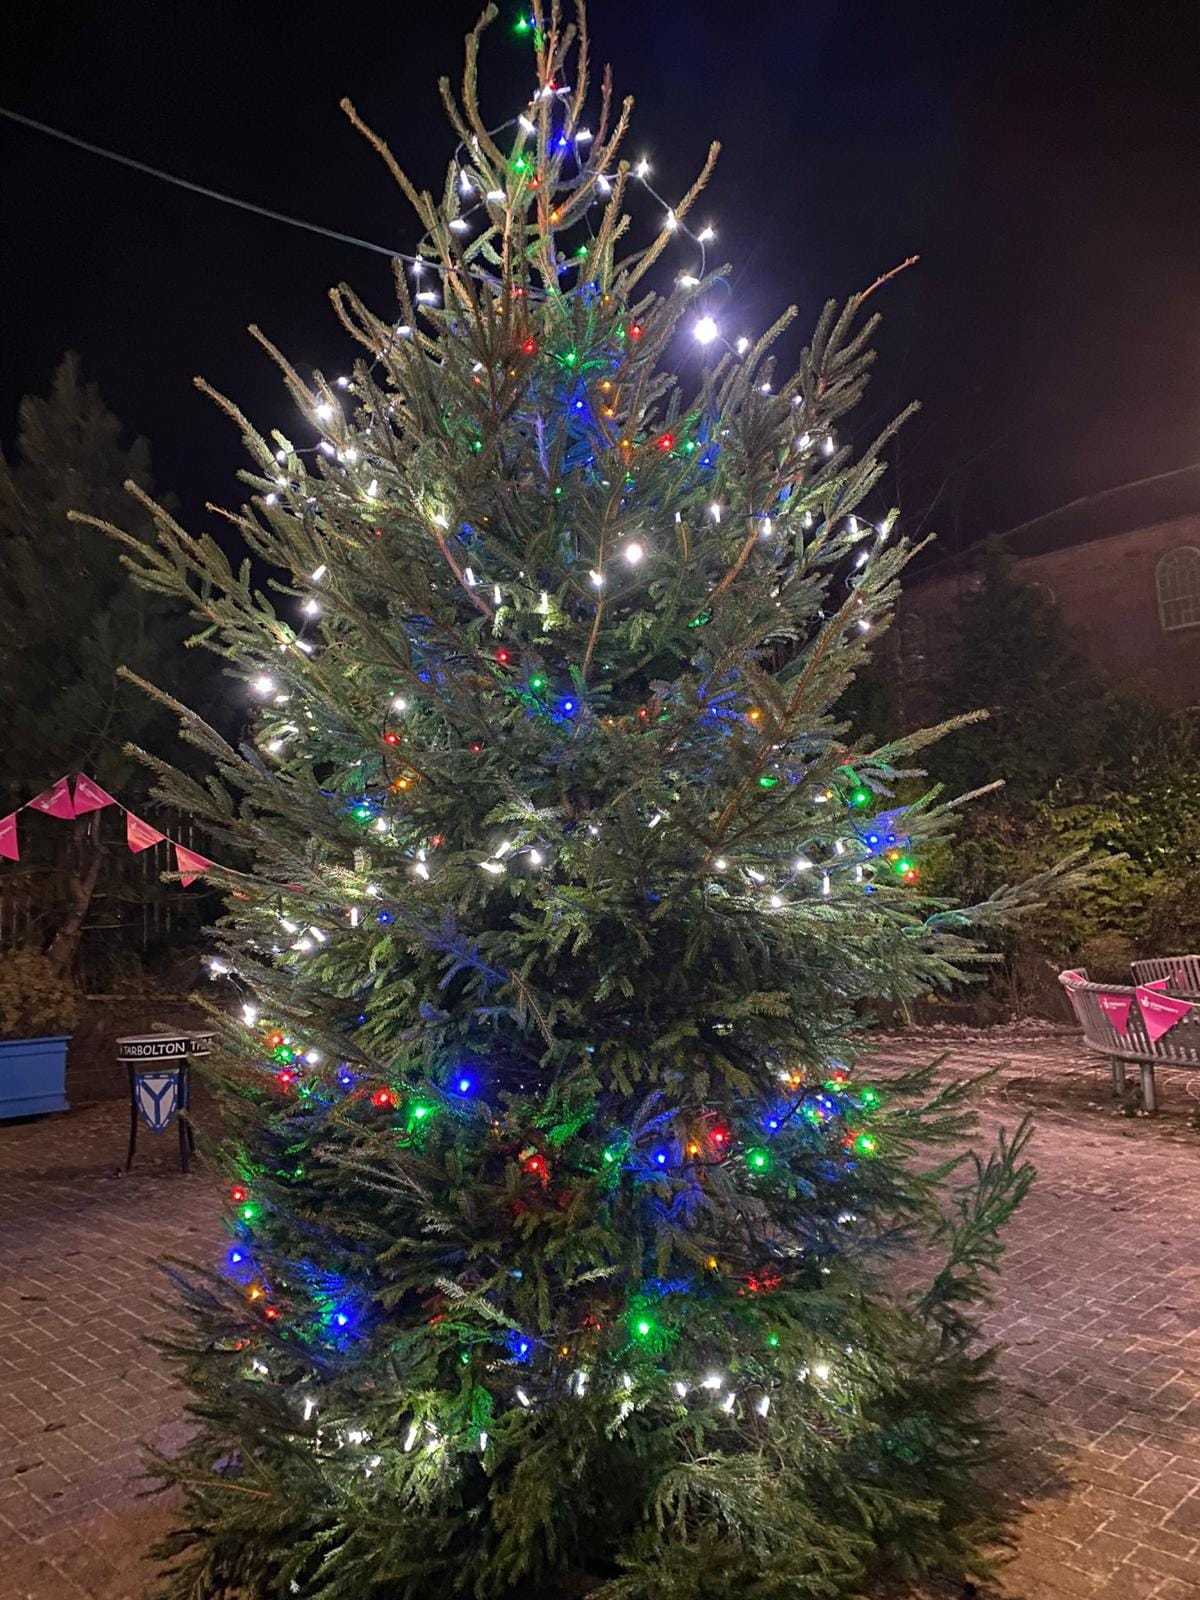 Tarboltons Christmas tree lent a festive glow to the village